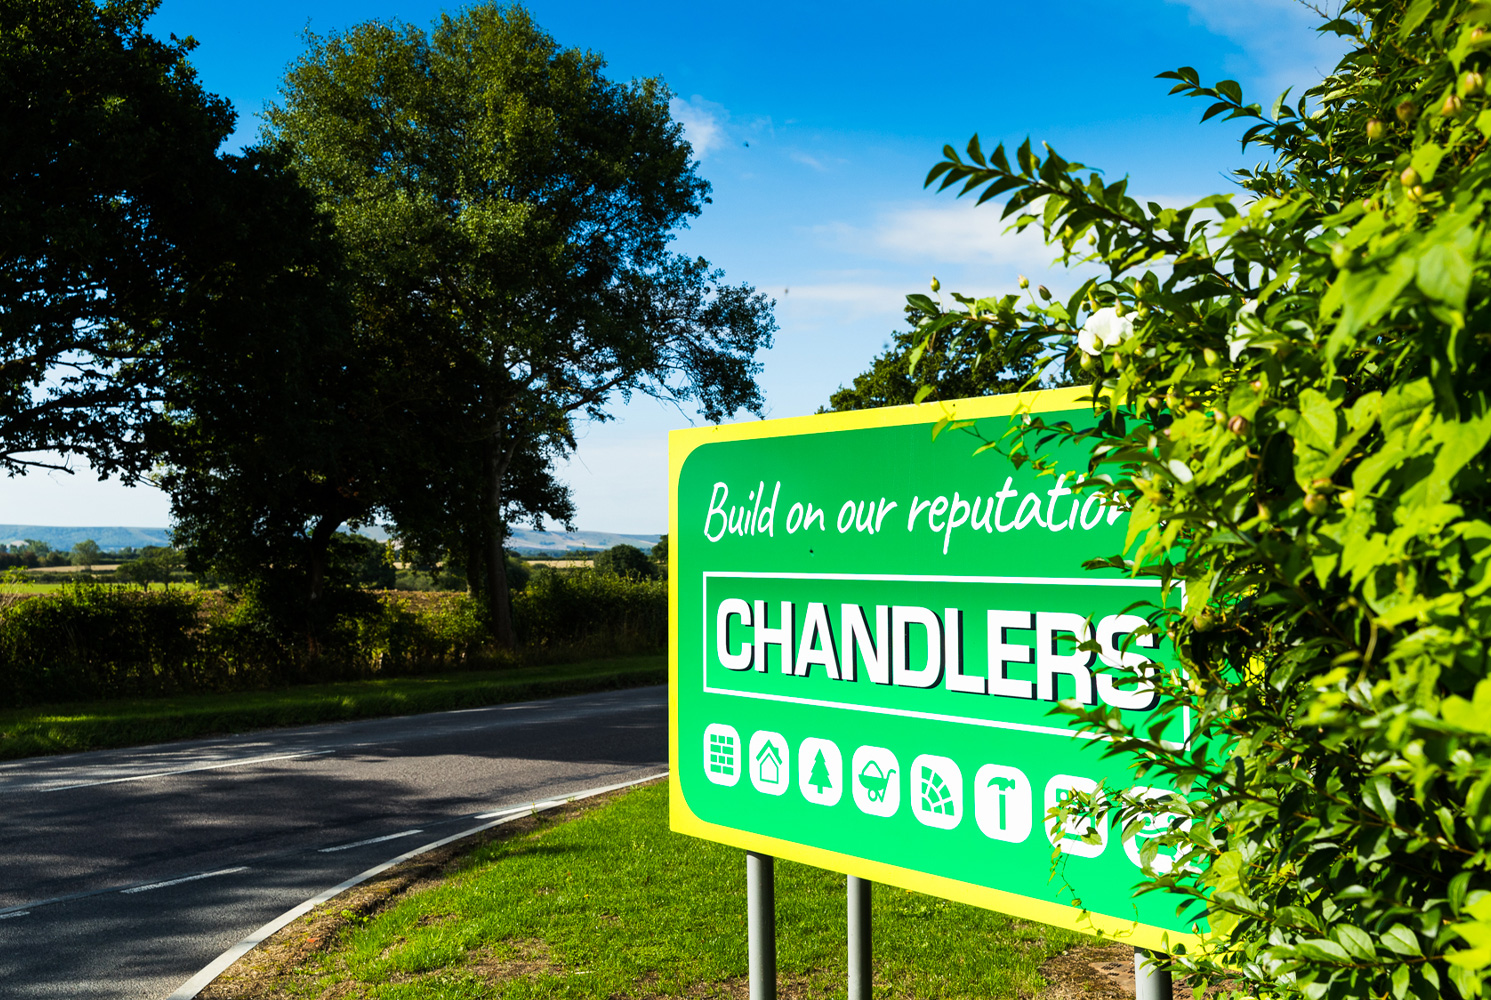 Chandlers Building Supplies